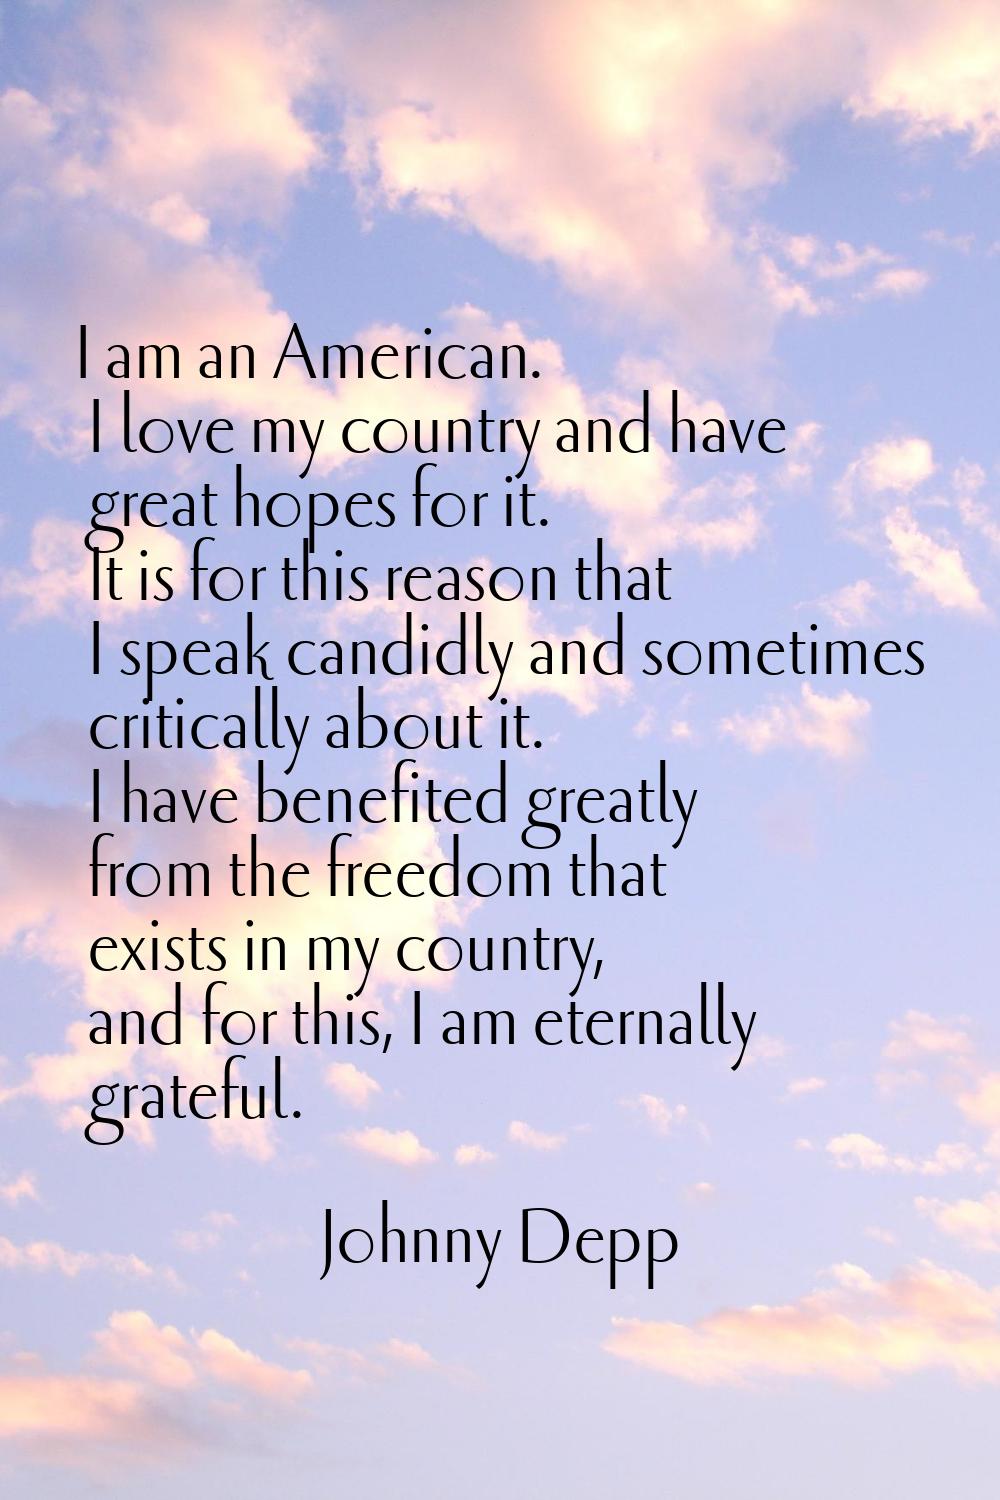 I am an American. I love my country and have great hopes for it. It is for this reason that I speak